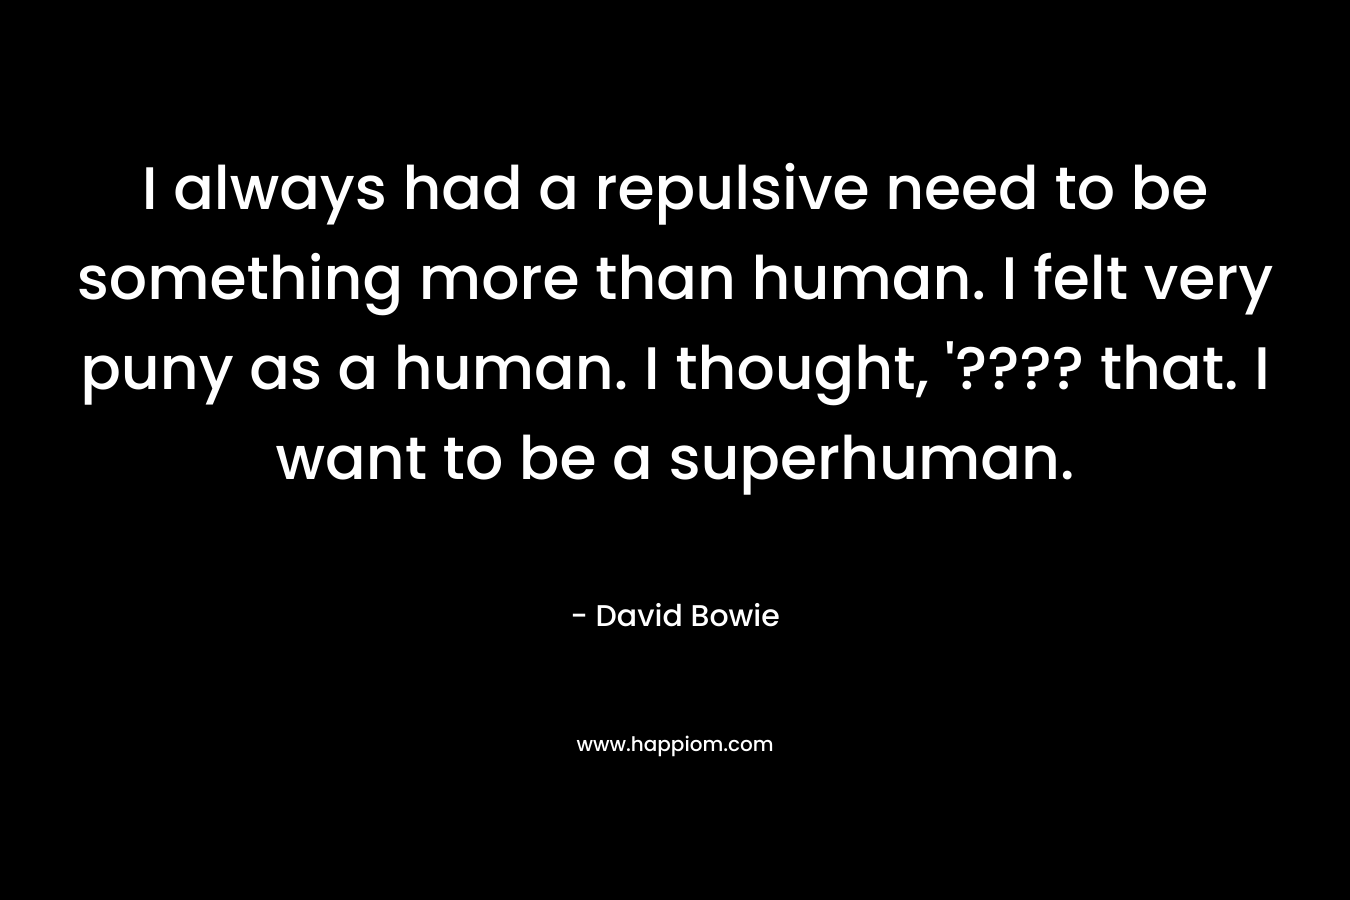 I always had a repulsive need to be something more than human. I felt very puny as a human. I thought, '???? that. I want to be a superhuman.